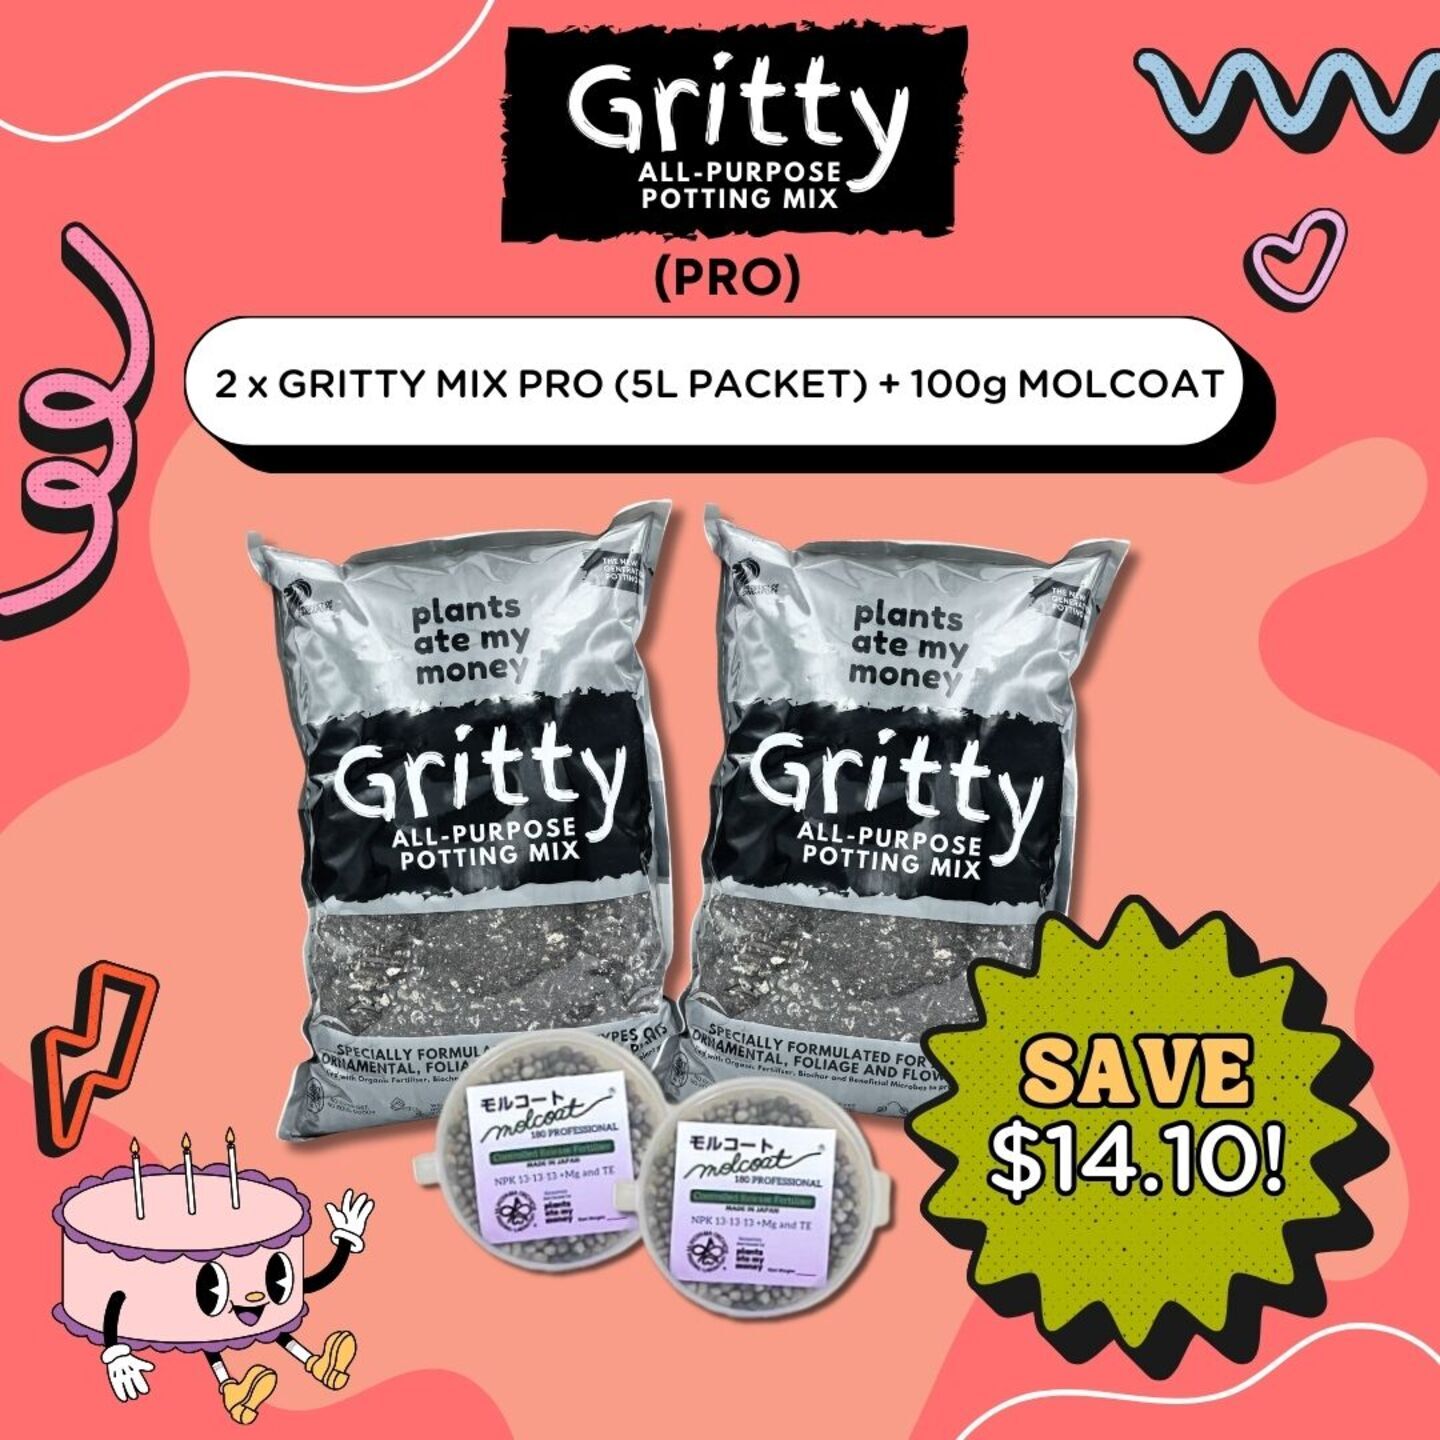 2 x GRITTY MIX PRO 5L PACKET + 100g MOLCOAT